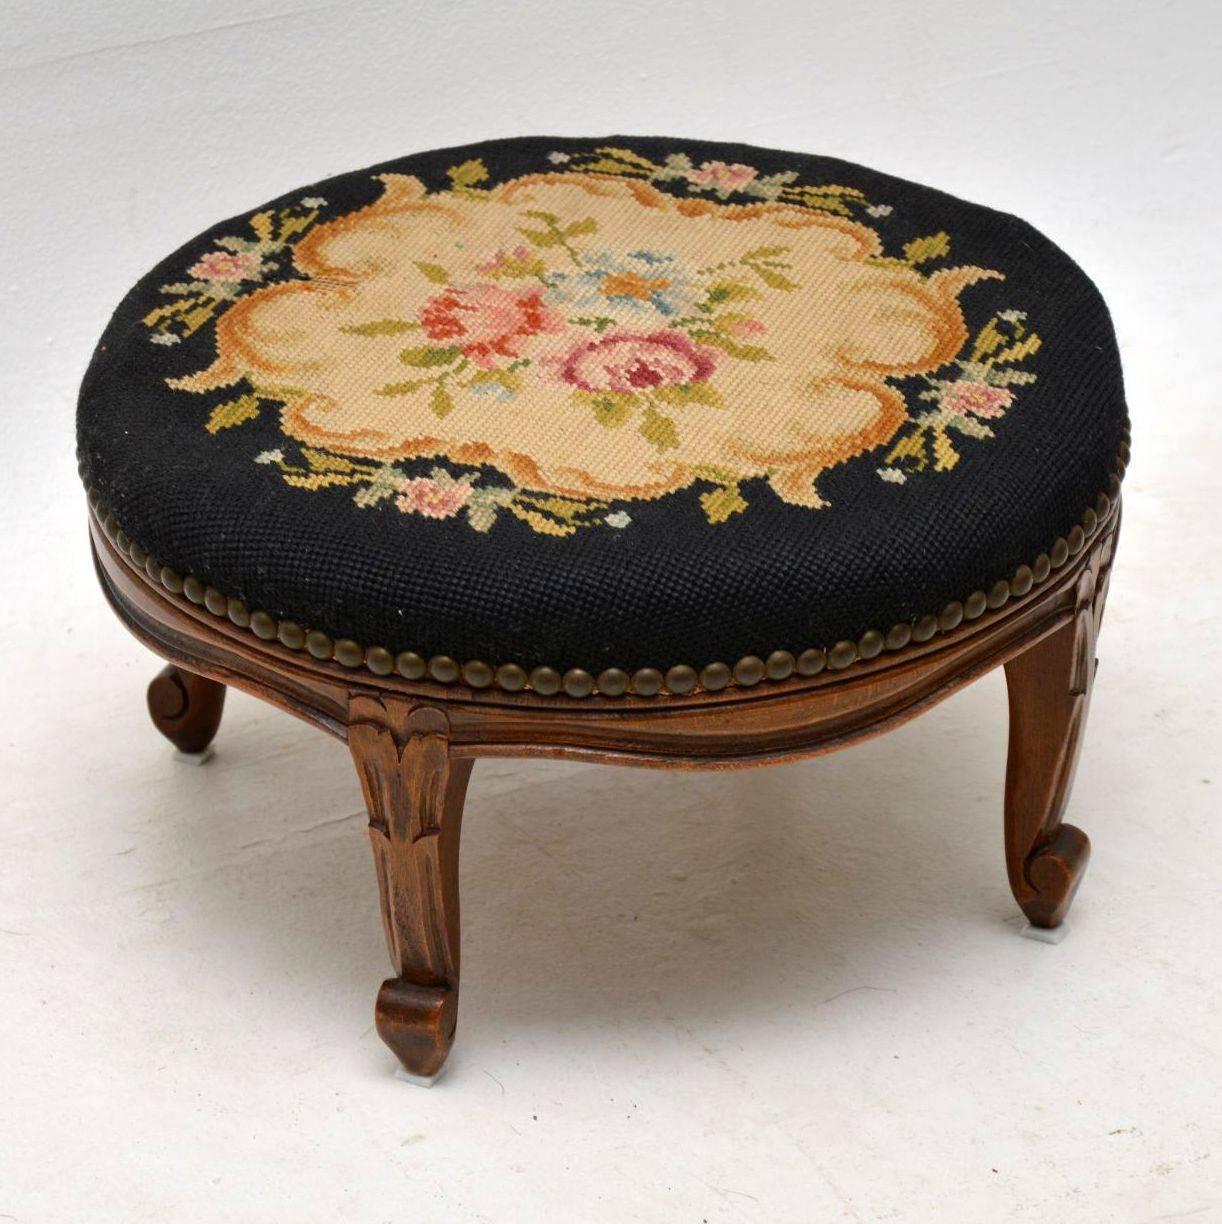 Victorian Pair of Antique French Needlepoint Foot Stools